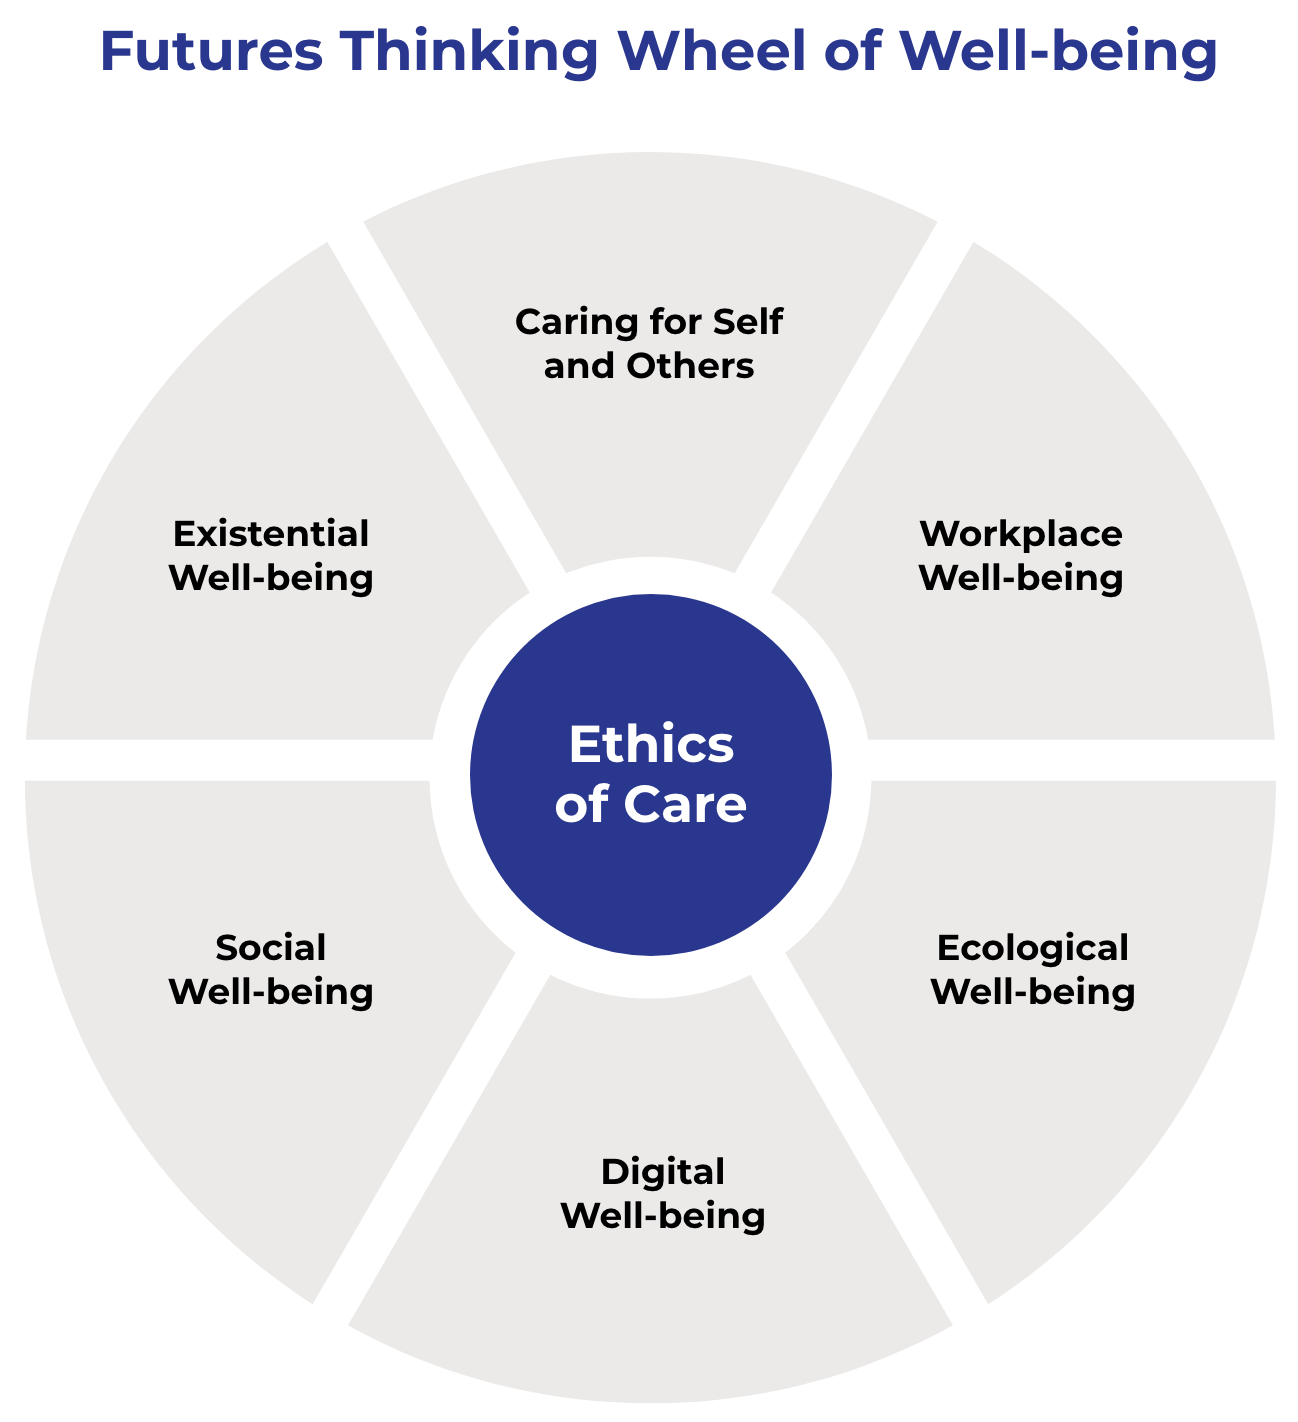 Futures Thinking Wheel of Well-Being: Centering Well-Being around Ethics of Care, the Wheel helps coaches think about domains of well-being including: care for self and others, workplace wellbeing, ecological wellbeing, digital wellbeing, social wellbeing, and existential wellbeing.